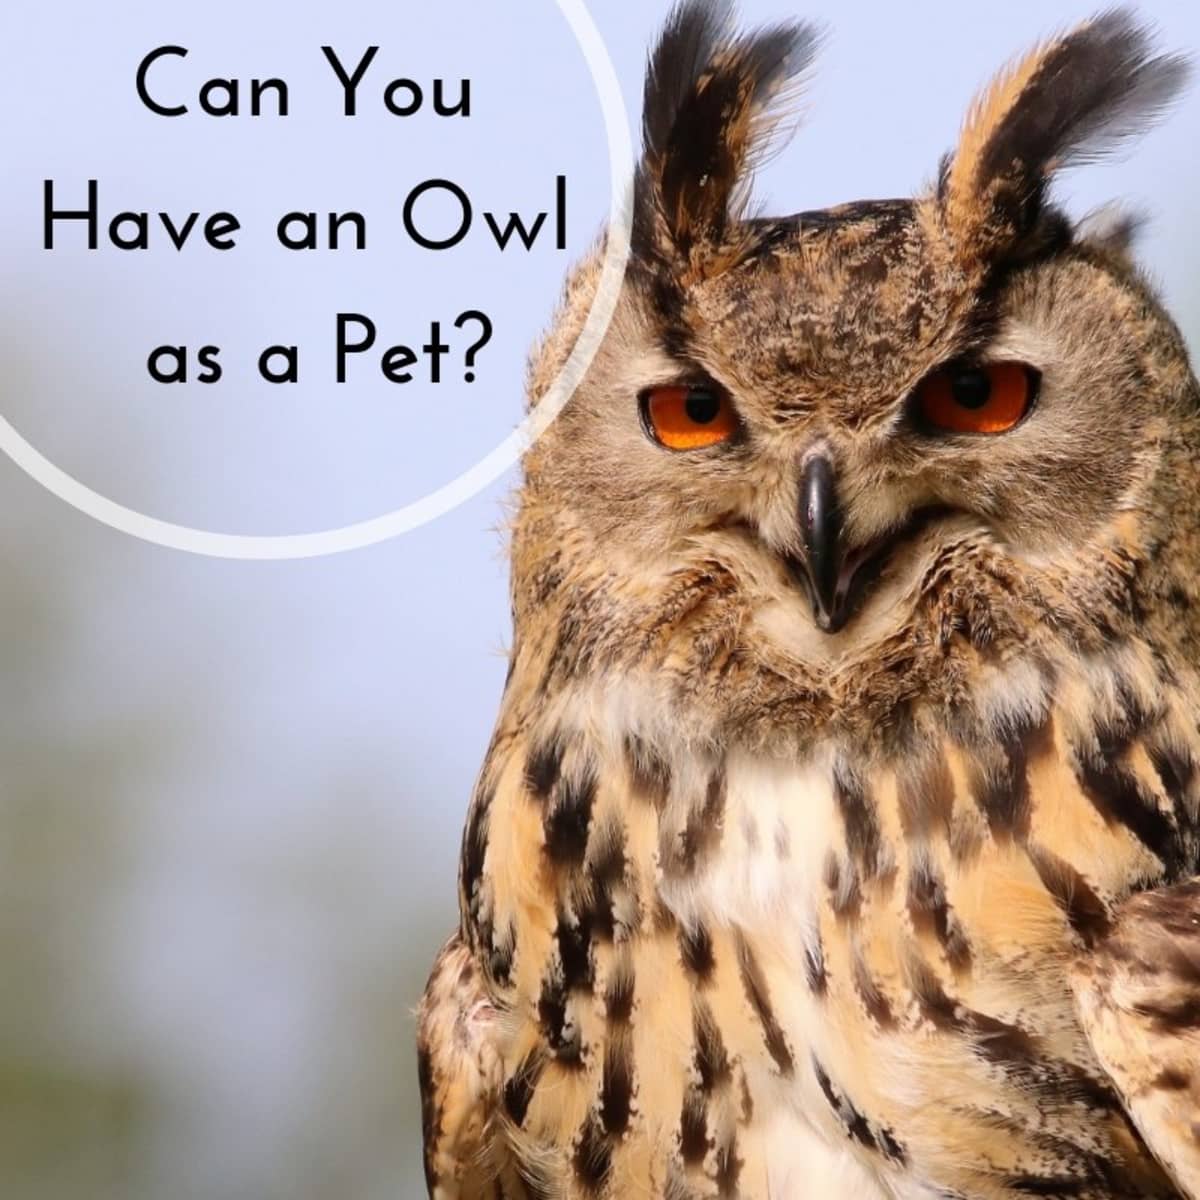 Keeping Owls as Pets: Is It Legal? - PetHelpful